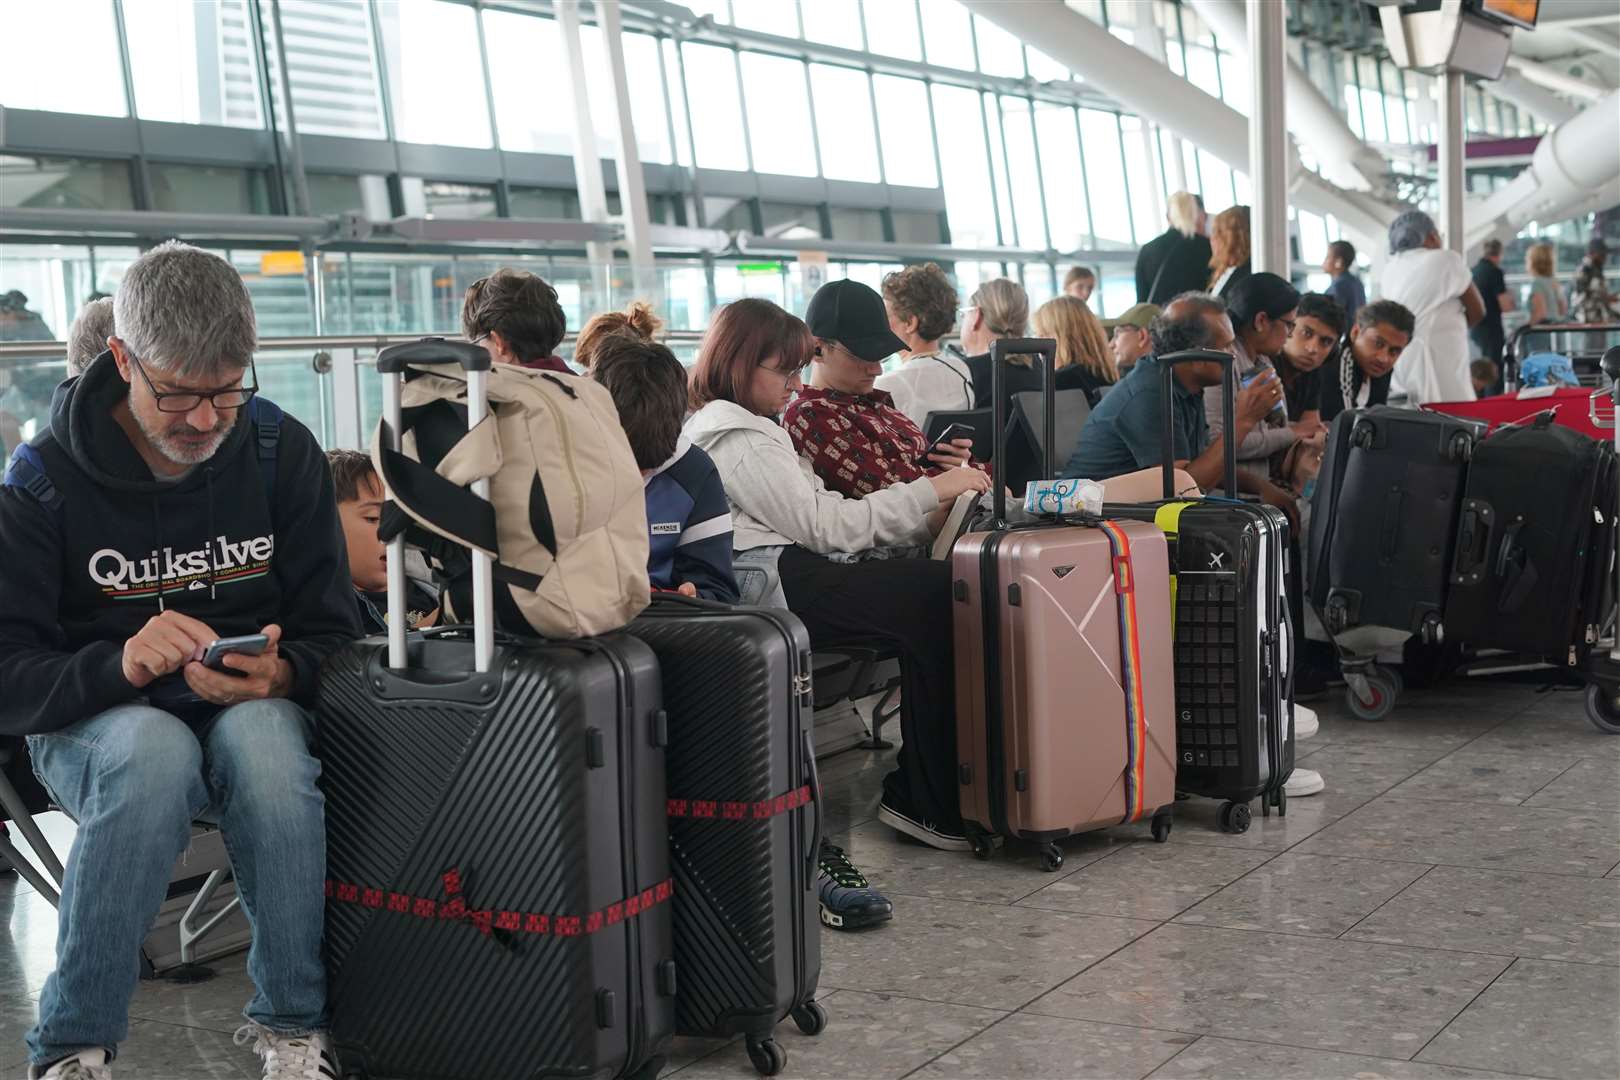 Passengers at Heathrow Airport as disruption from air traffic control issues continues across the UK and Ireland (Lucy North/PA)